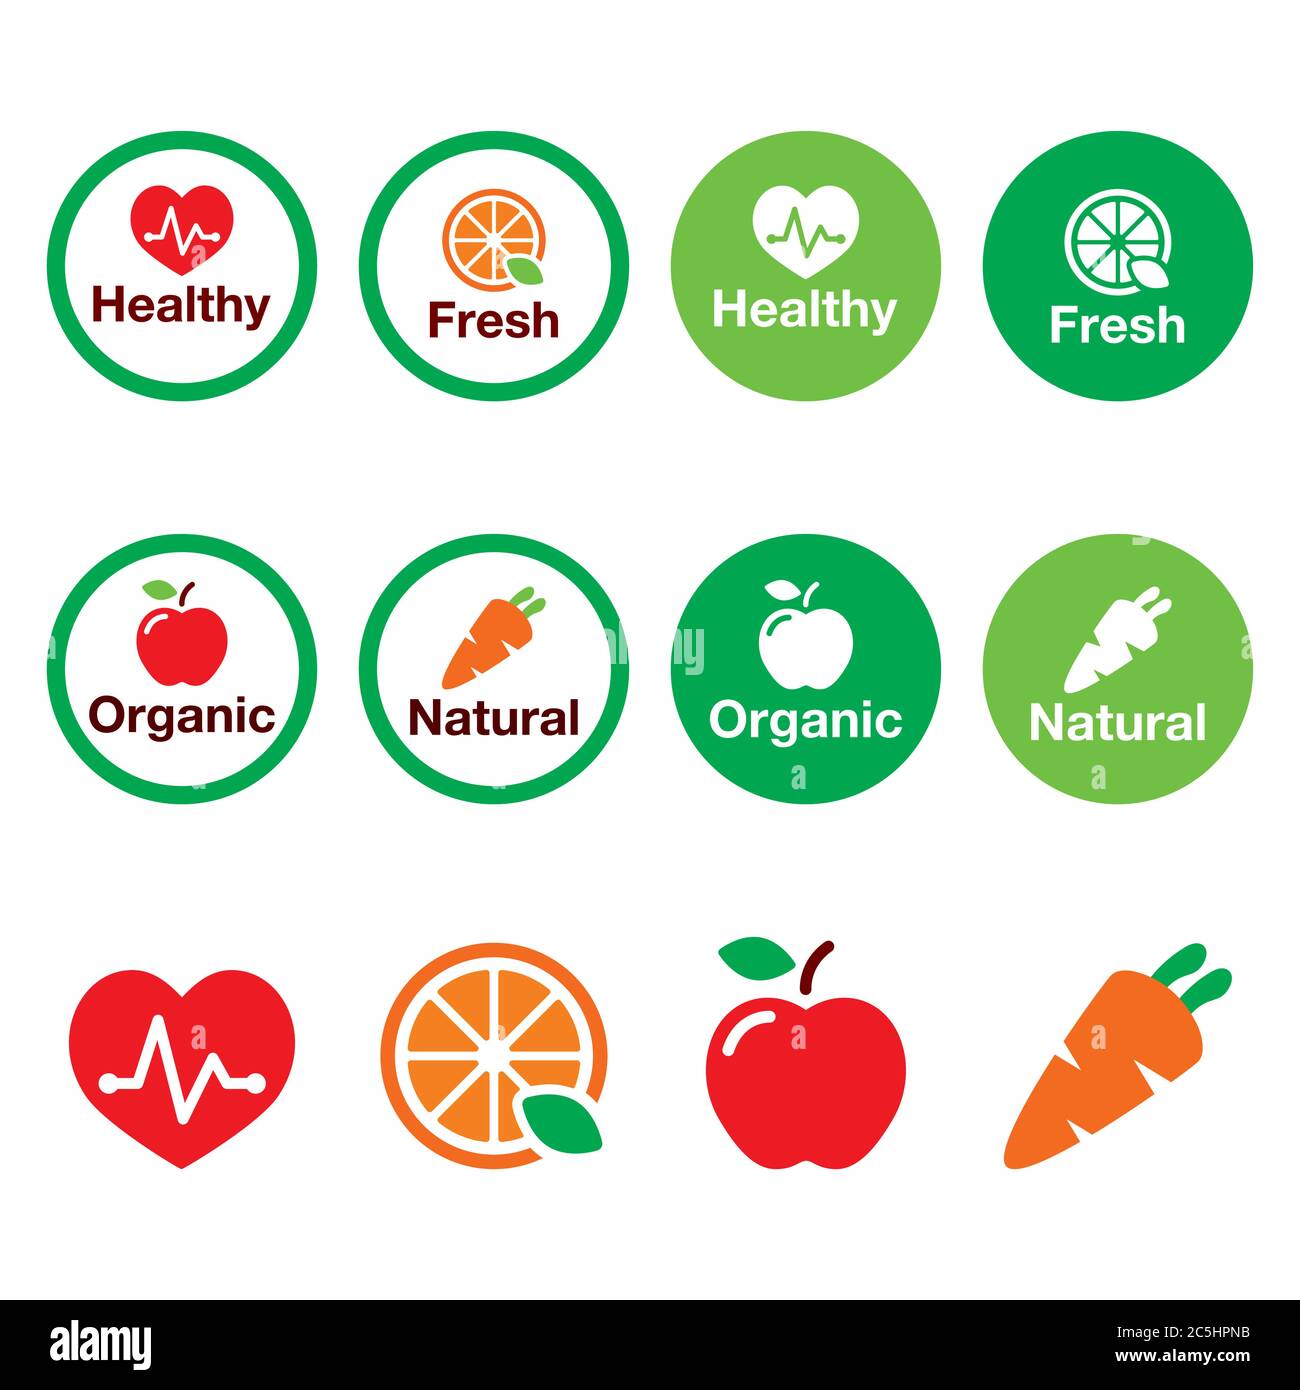 Organic food, heatlhy eating fresh and natural products vector icons set Stock Vector